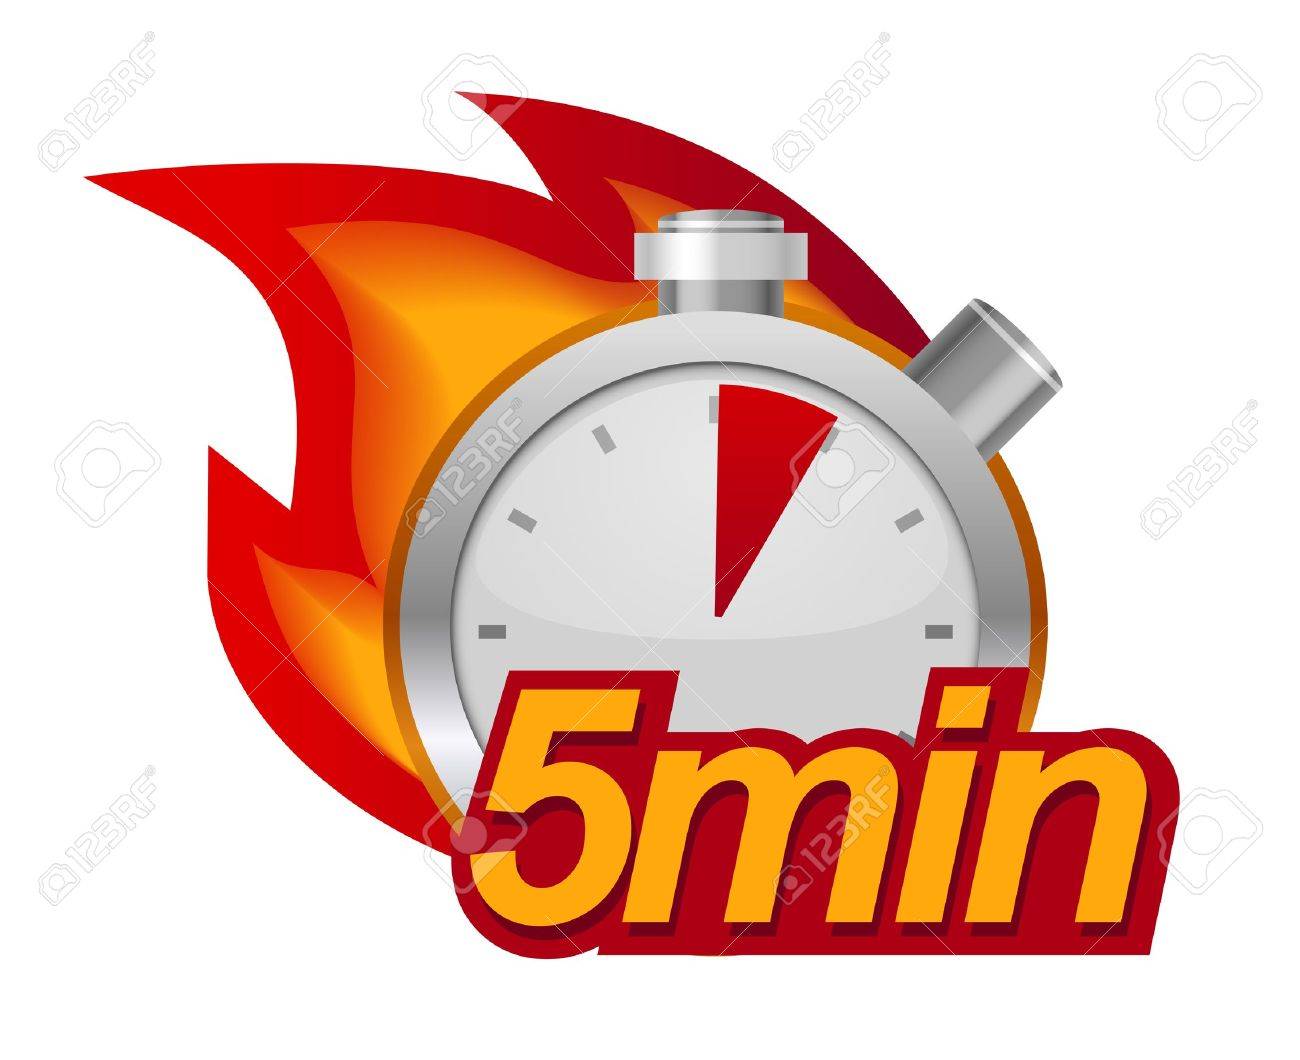 stopwatch clipart 5 minute